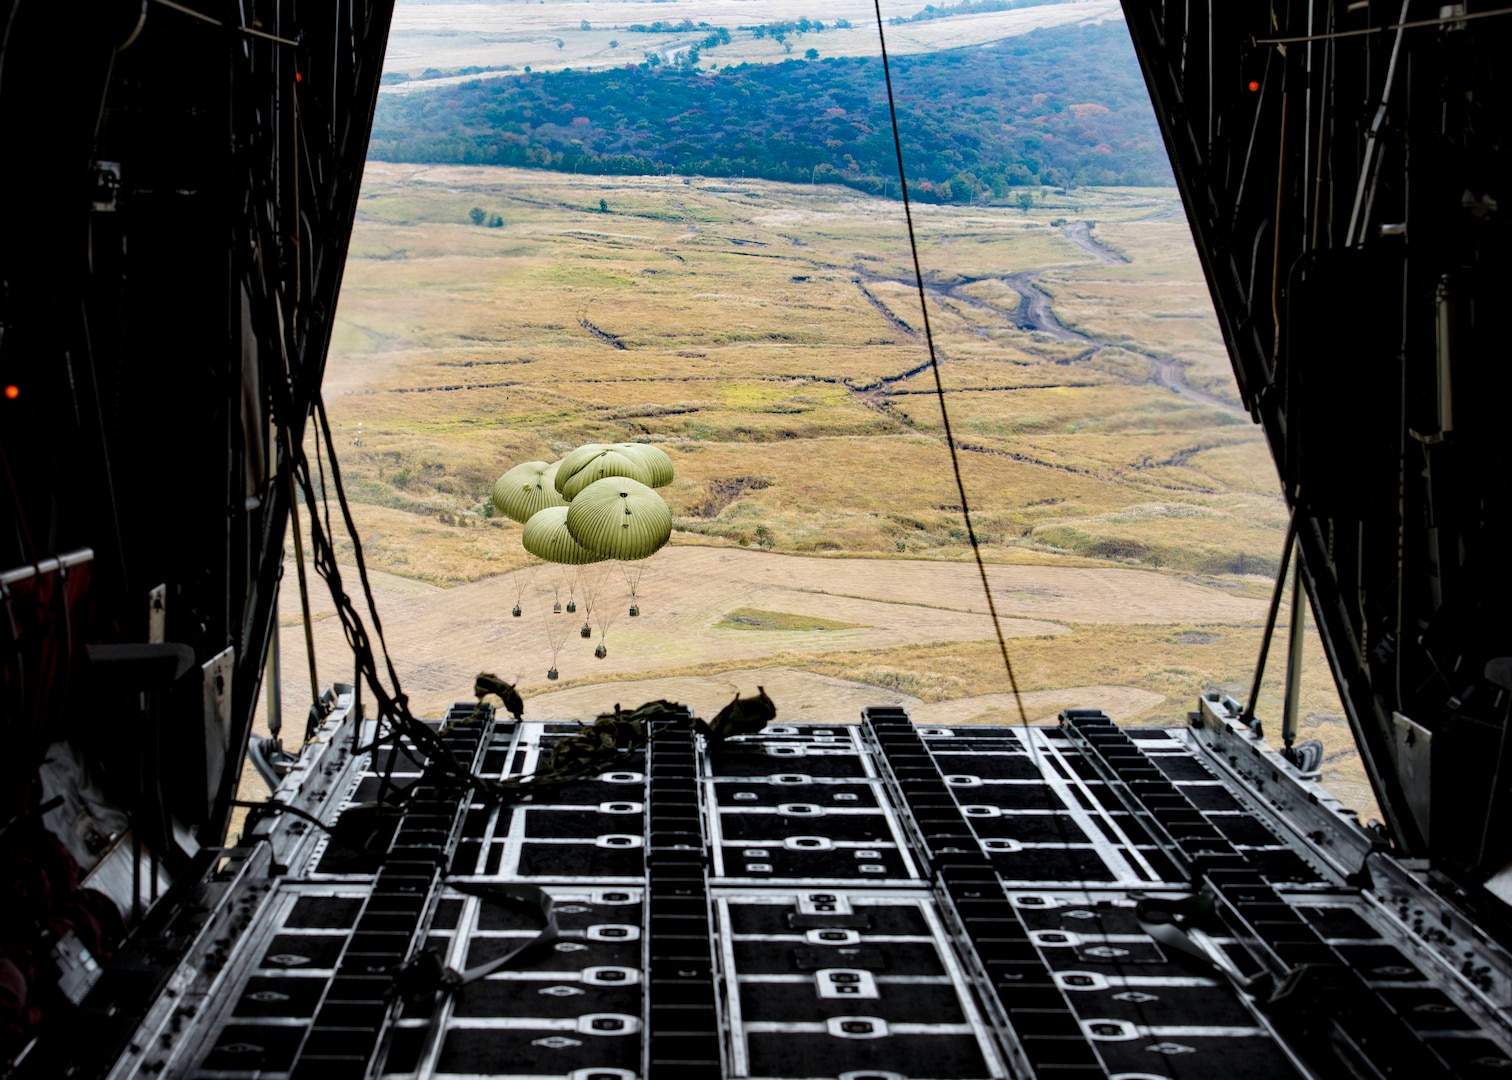 Japan Ground Self-Defense Force container delivery system bundles parachute to a drop zone after being dropped out of a C-130 Hercules during Keen Sword 2017, Nov. 10, 2016, over the Kyushu prefecture, Japan. Keen Sword is designed to practice the critical capabilities to support the defense of Japan, and to respond to a potential crisis or contingency in the Indo-Asia-Pacific region. (U.S. Air Force photo by Airman 1st Class Donald Hudson/Released)